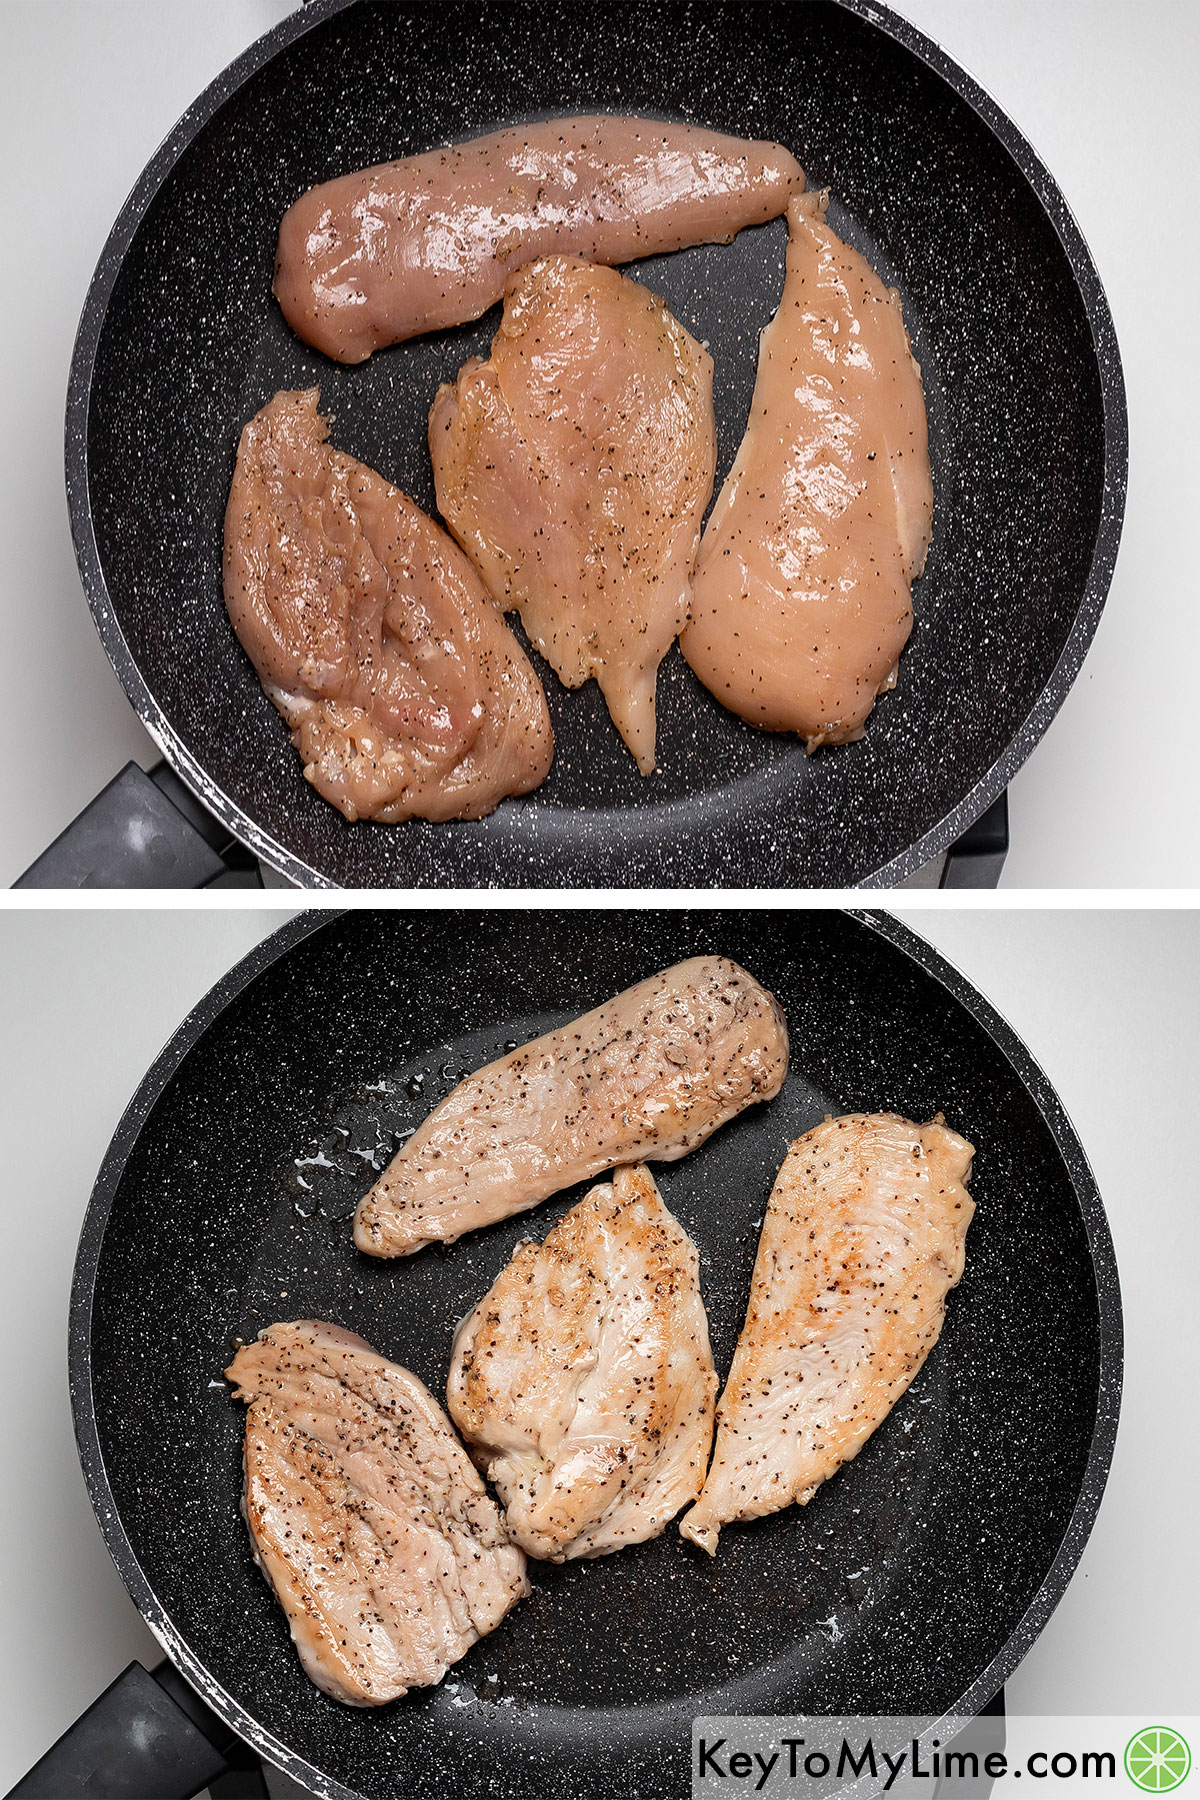 Adding the seasoned chicken breasts to a hot skillet and cooking until browned.